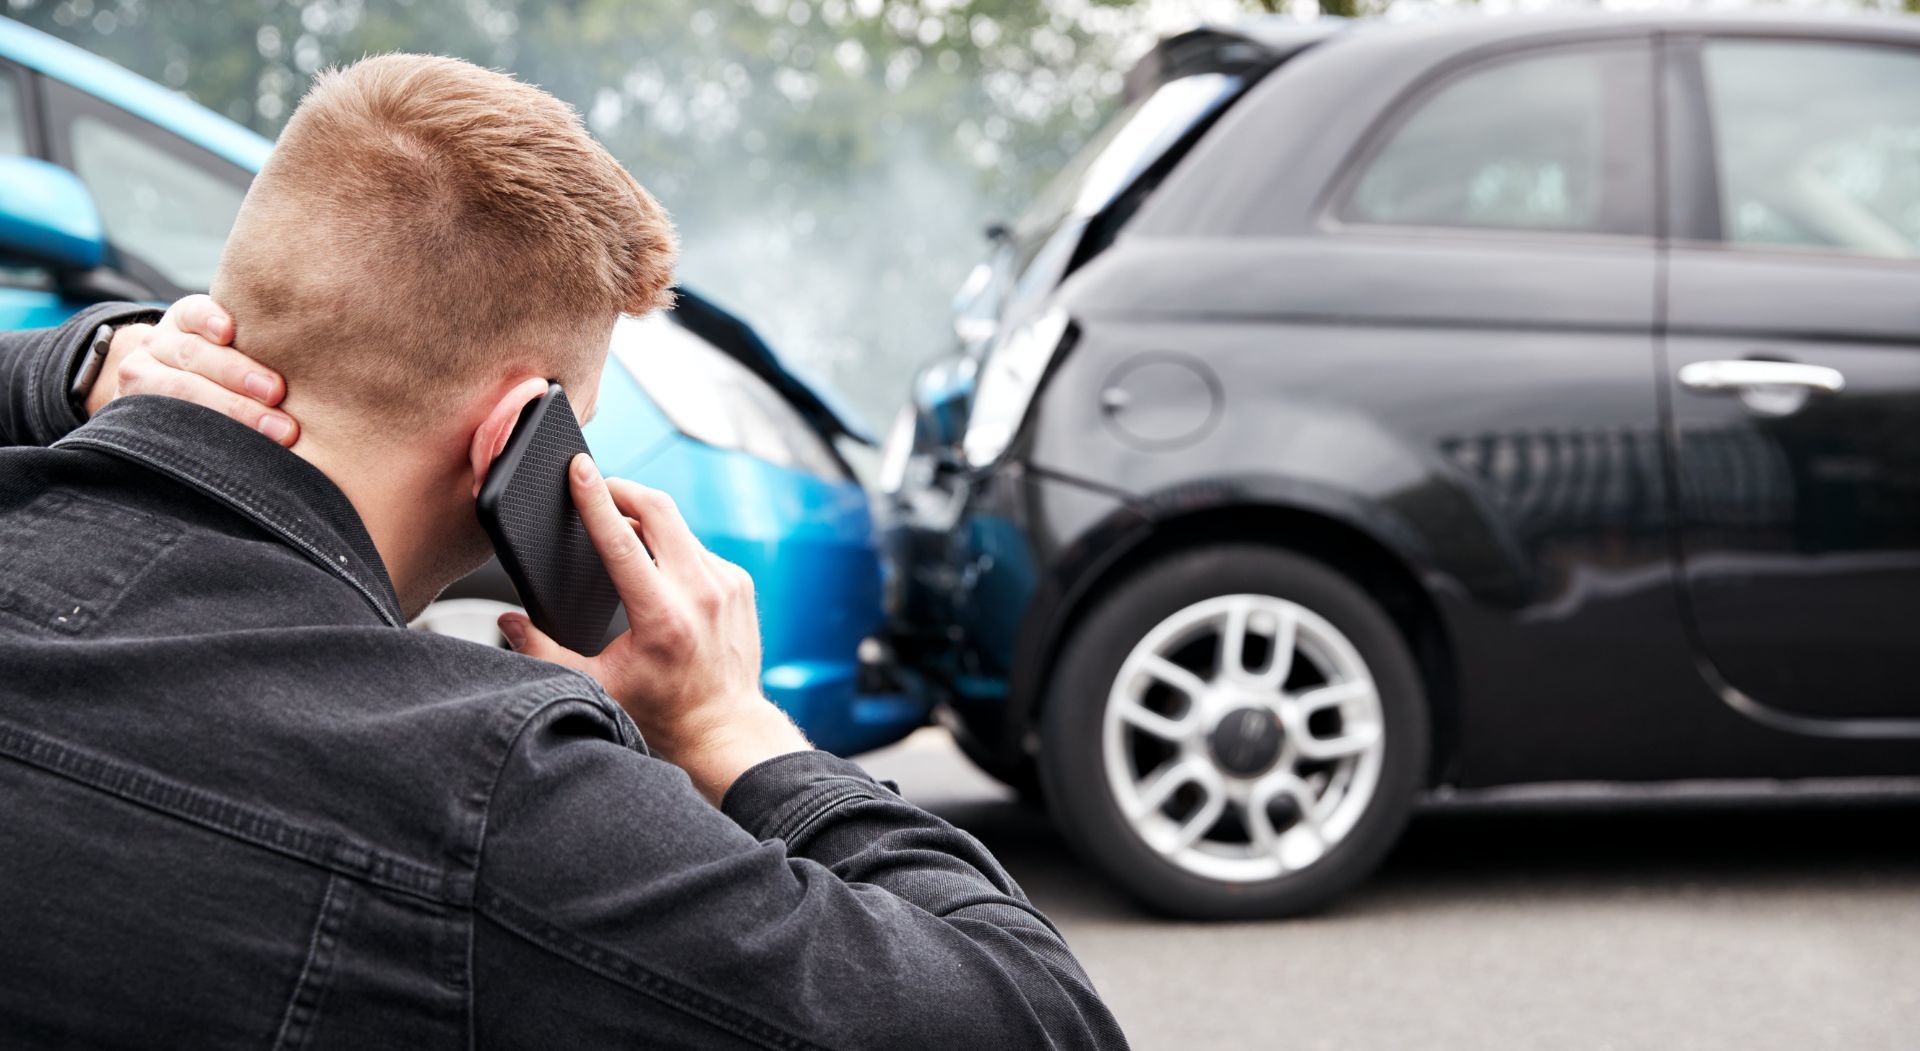 8 Steps to Take After a Vehicle Collision